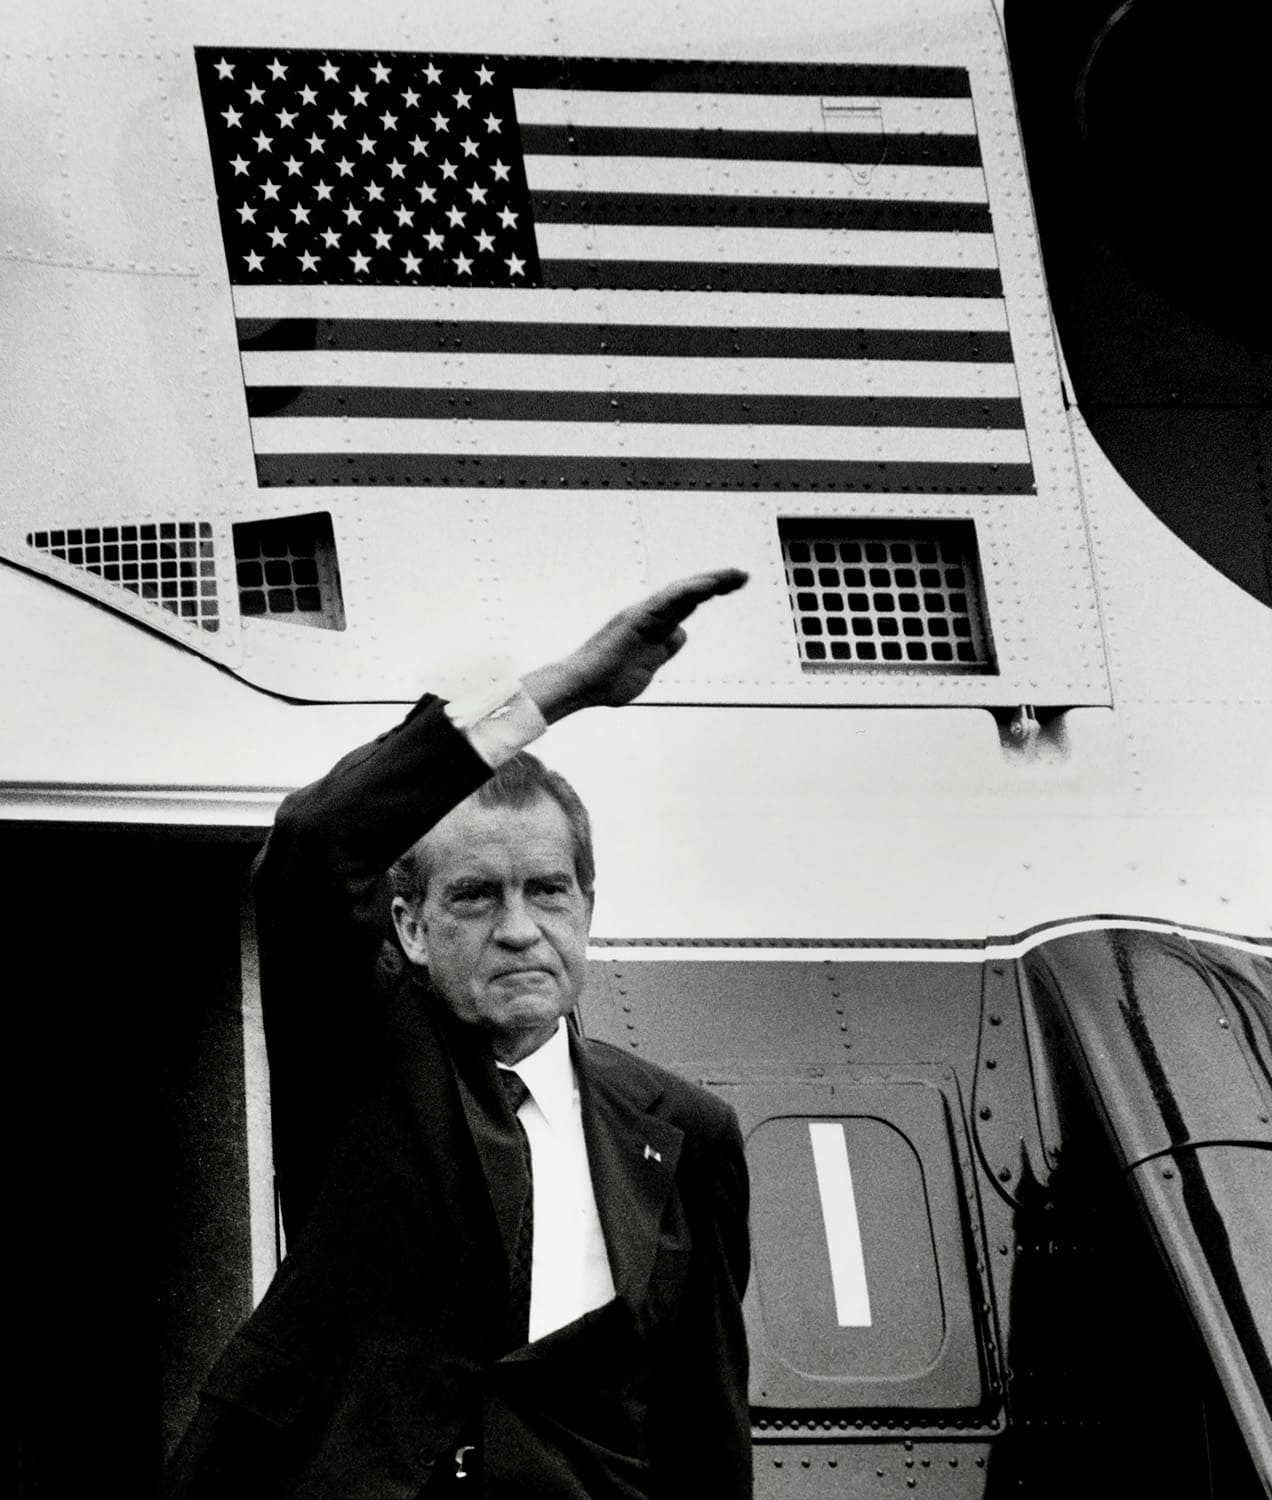 President Richard Nixon waves goodbye from his helicopter after resigning, August 9, 1974